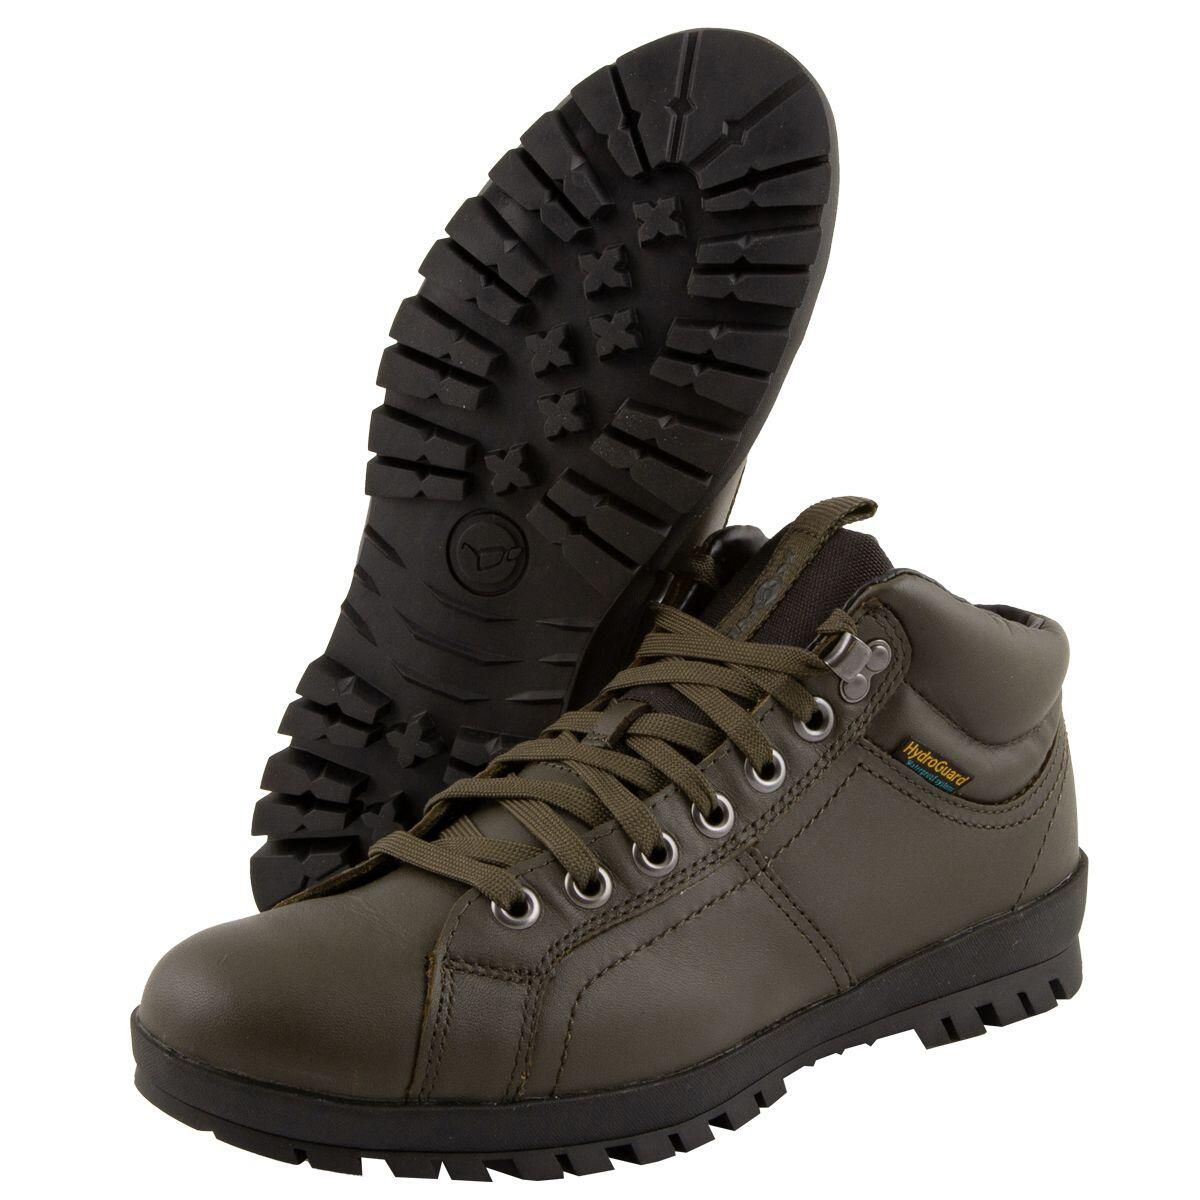 Korda NEW 2021 Kore Kombat Boots In Olive or Brown Free Post All Sizes 